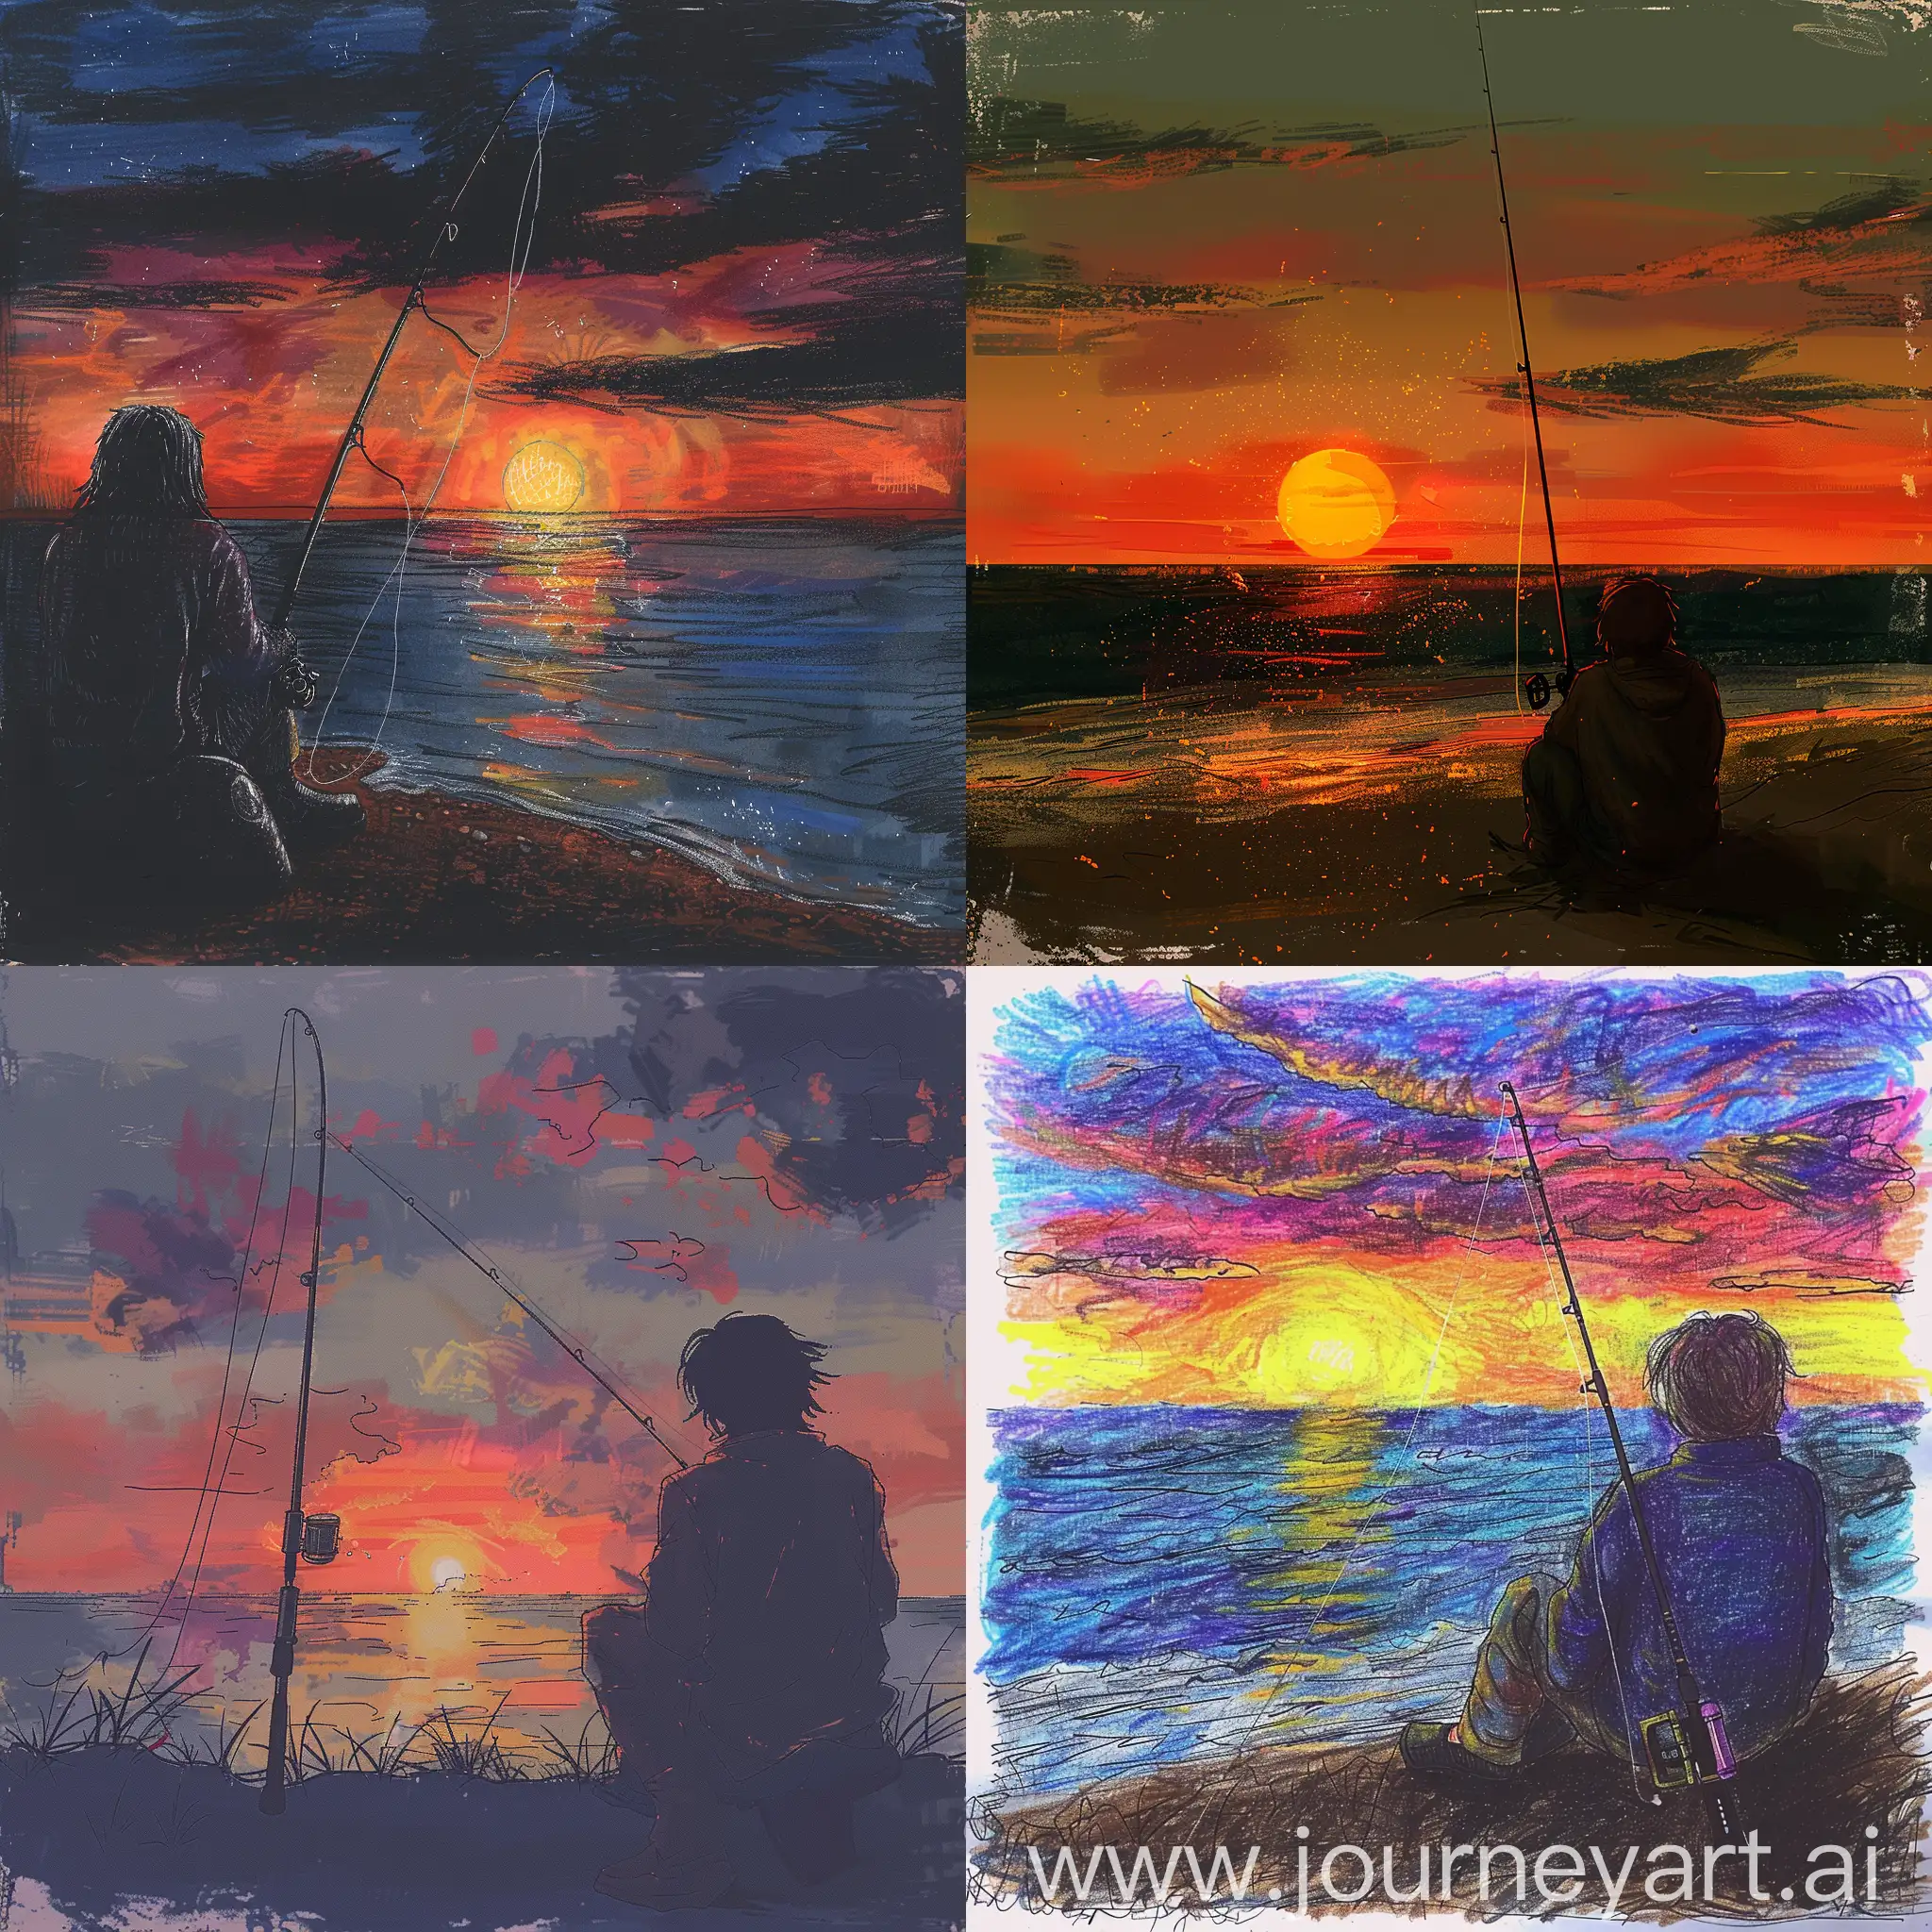 Make me a drawing of someone watching the sunset beach with his fishing rod next to him. He longs for love, but he would rather stop fishing and start waiting at the shore